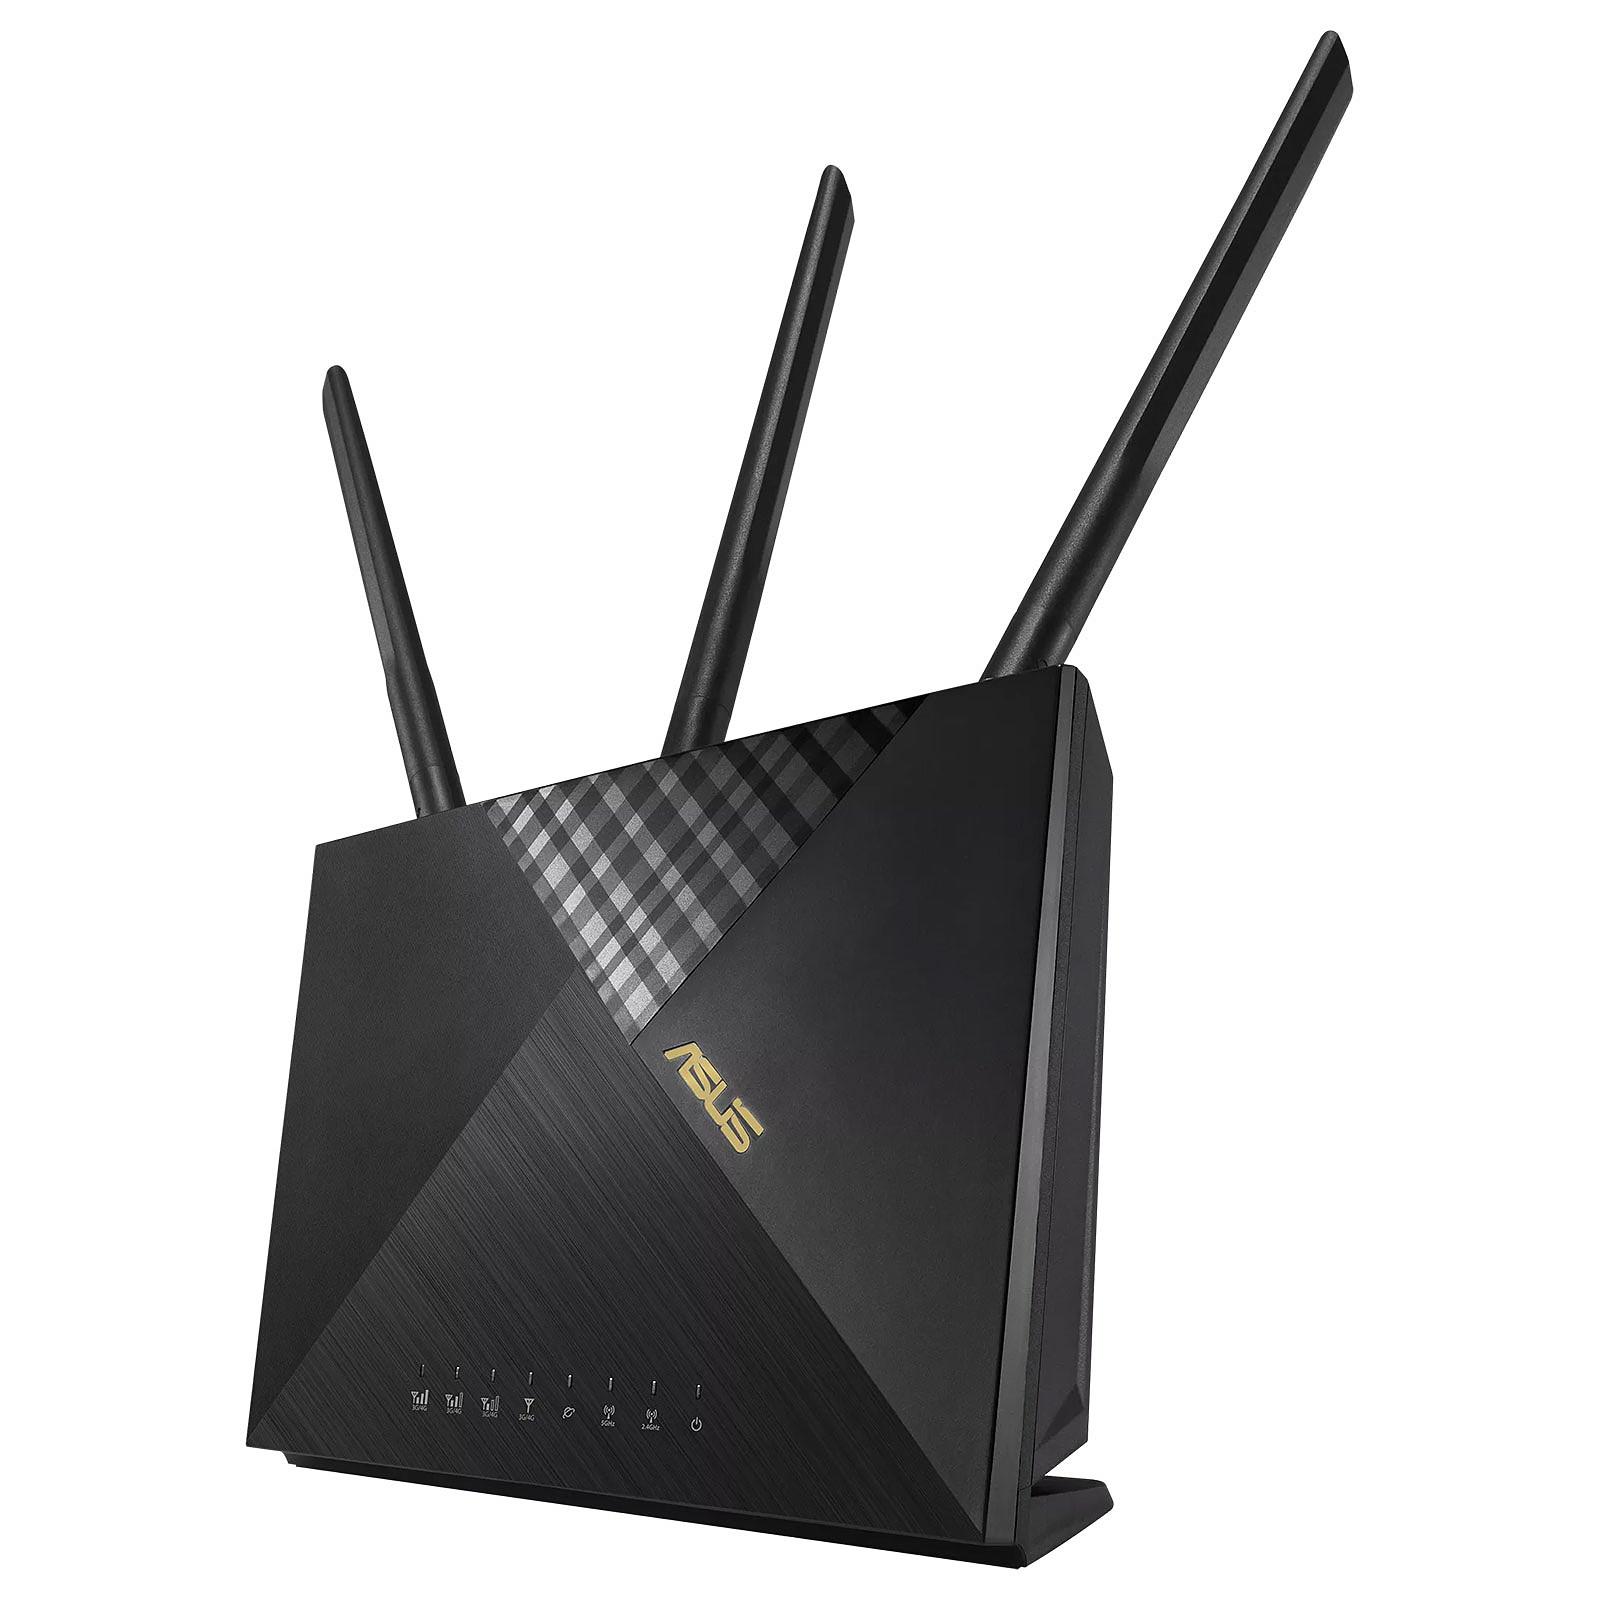 4G-AX56 AX1800 Dual Band Smart Wi-Fi 6 LTE Router